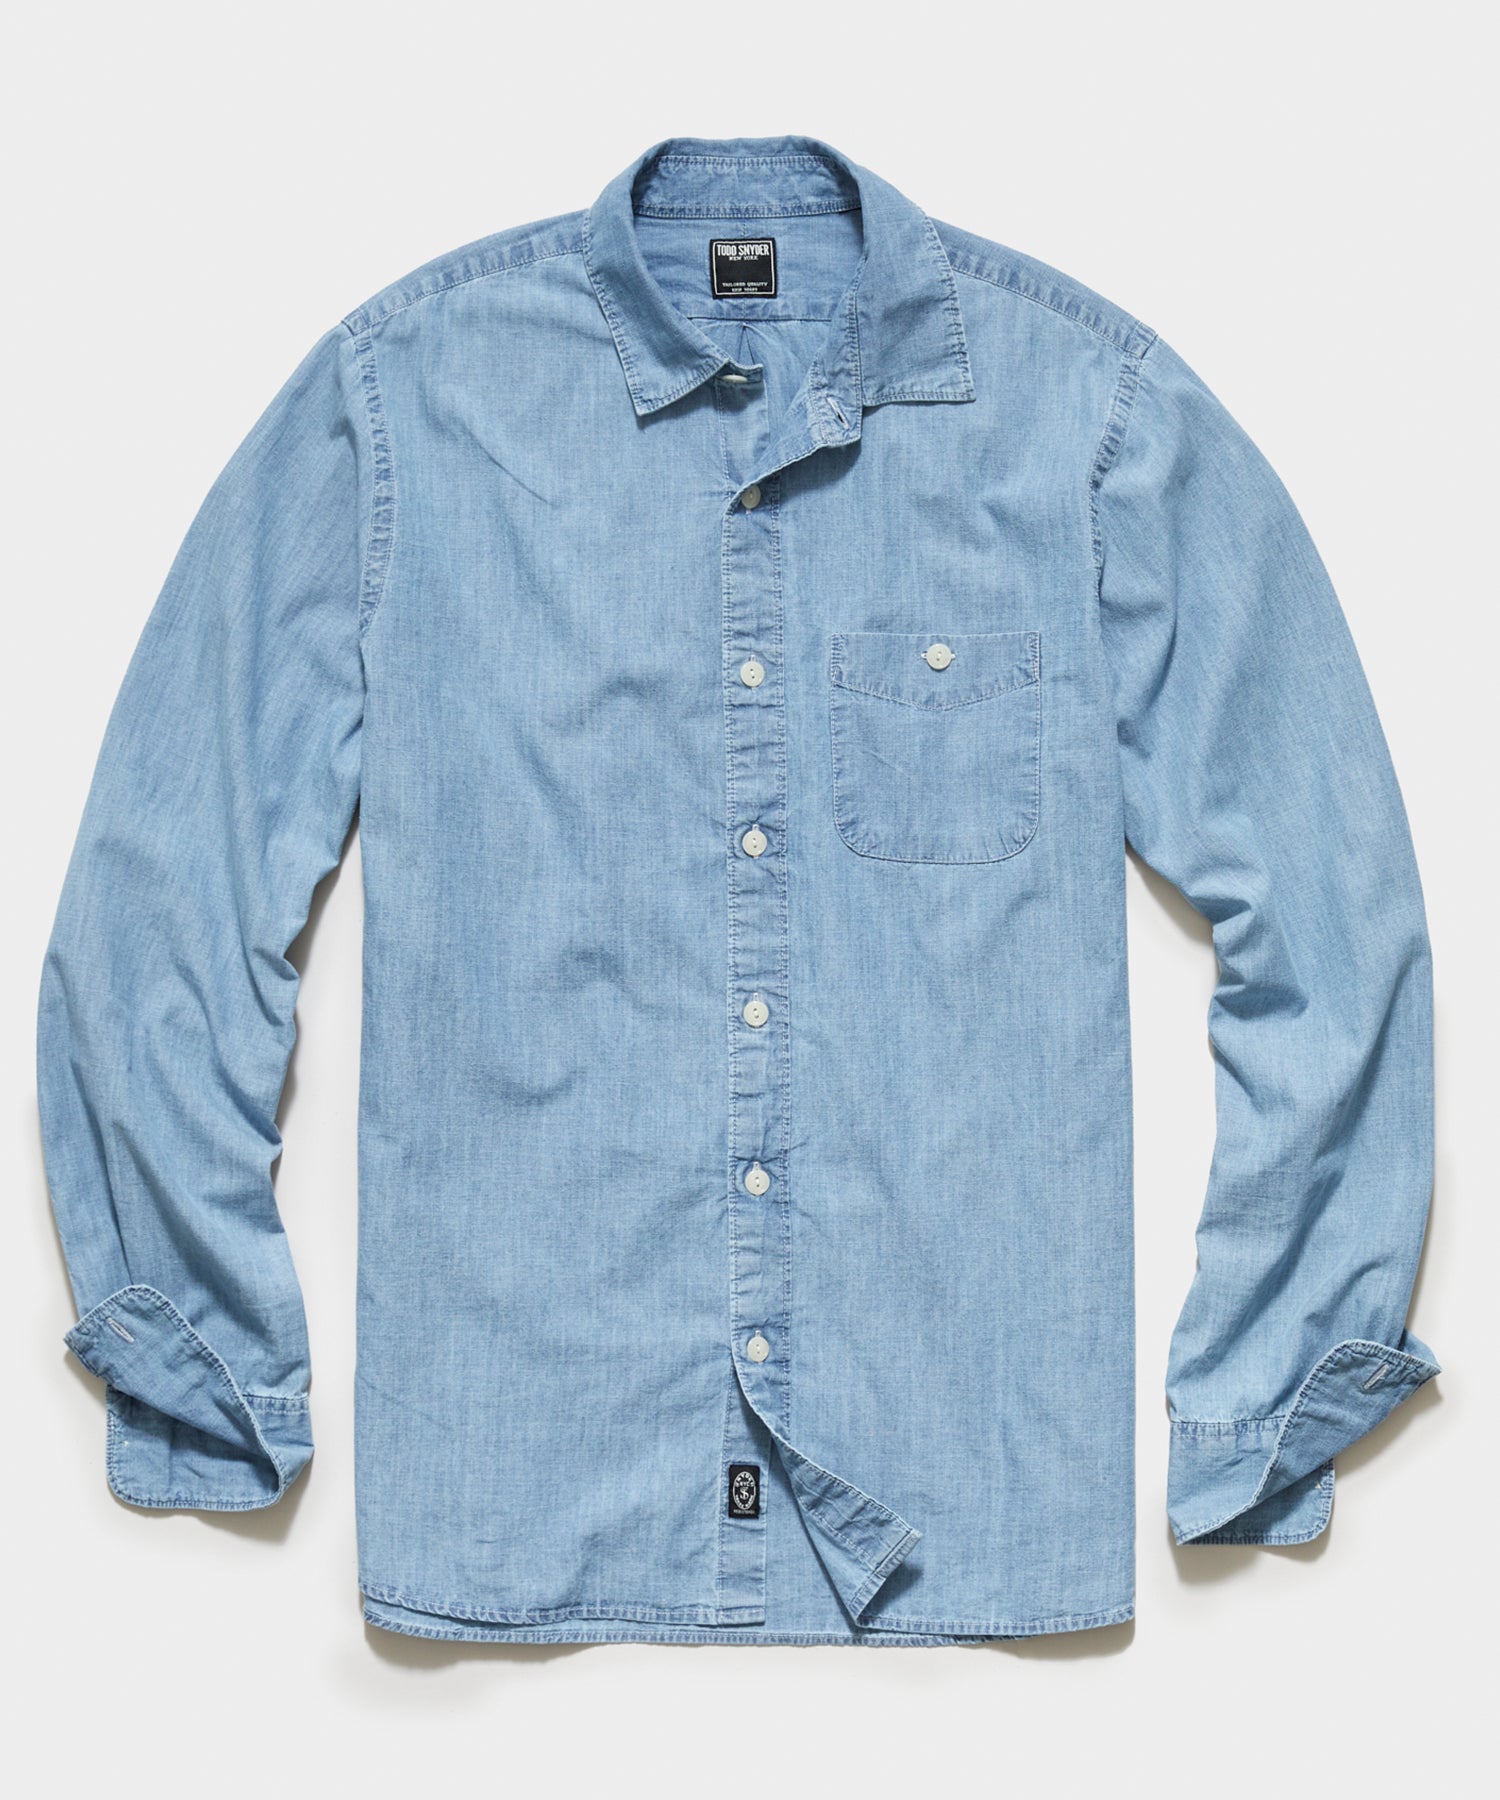 best chambray shirts for men | The Style Guide